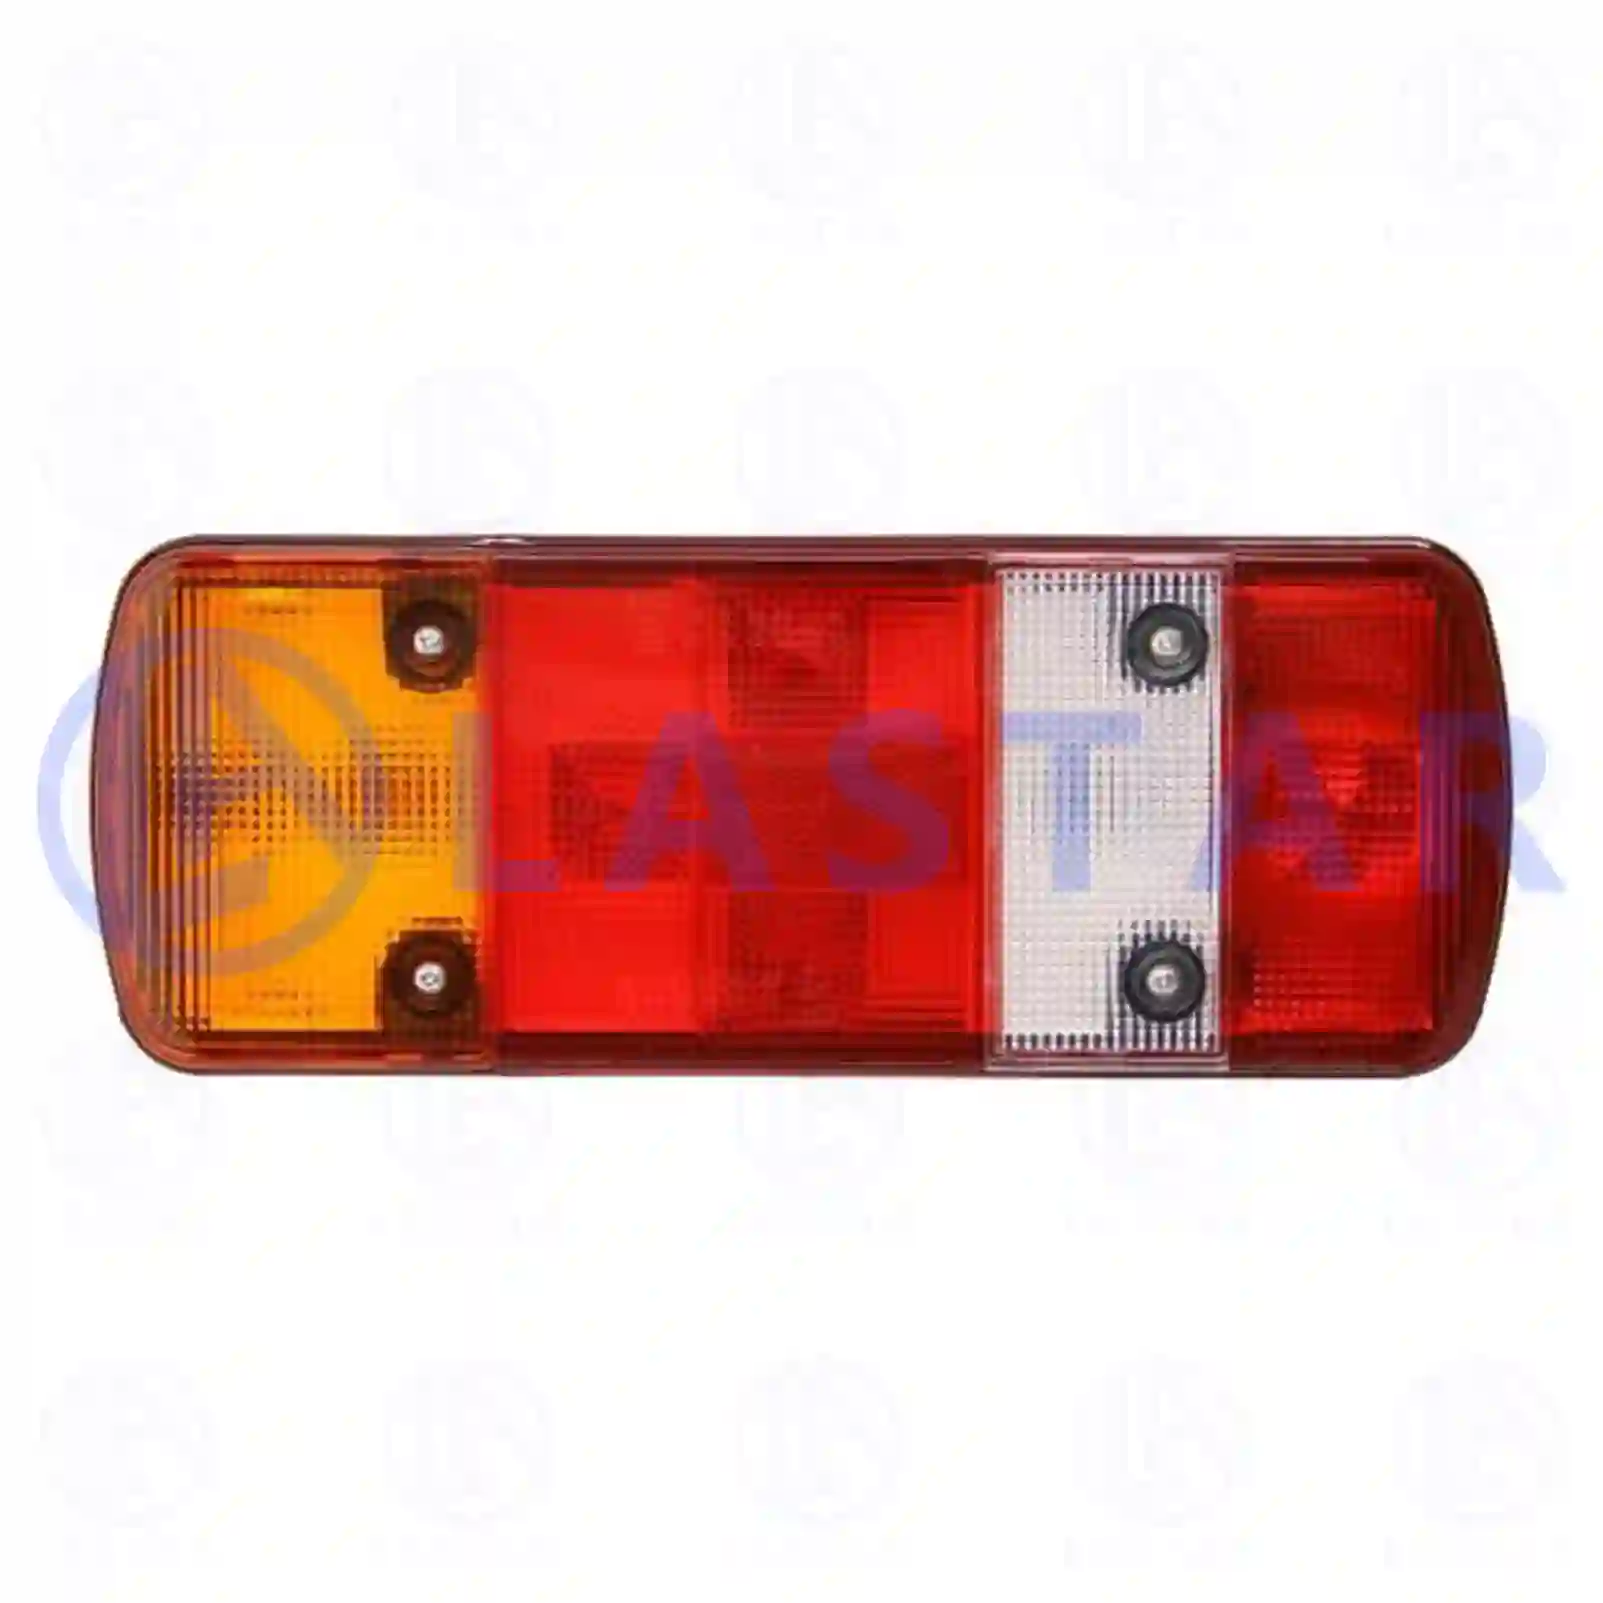 Tail lamp, left, 77711616, 0025446803, 0025447003, 6865440003, ZG21008-0008, ||  77711616 Lastar Spare Part | Truck Spare Parts, Auotomotive Spare Parts Tail lamp, left, 77711616, 0025446803, 0025447003, 6865440003, ZG21008-0008, ||  77711616 Lastar Spare Part | Truck Spare Parts, Auotomotive Spare Parts